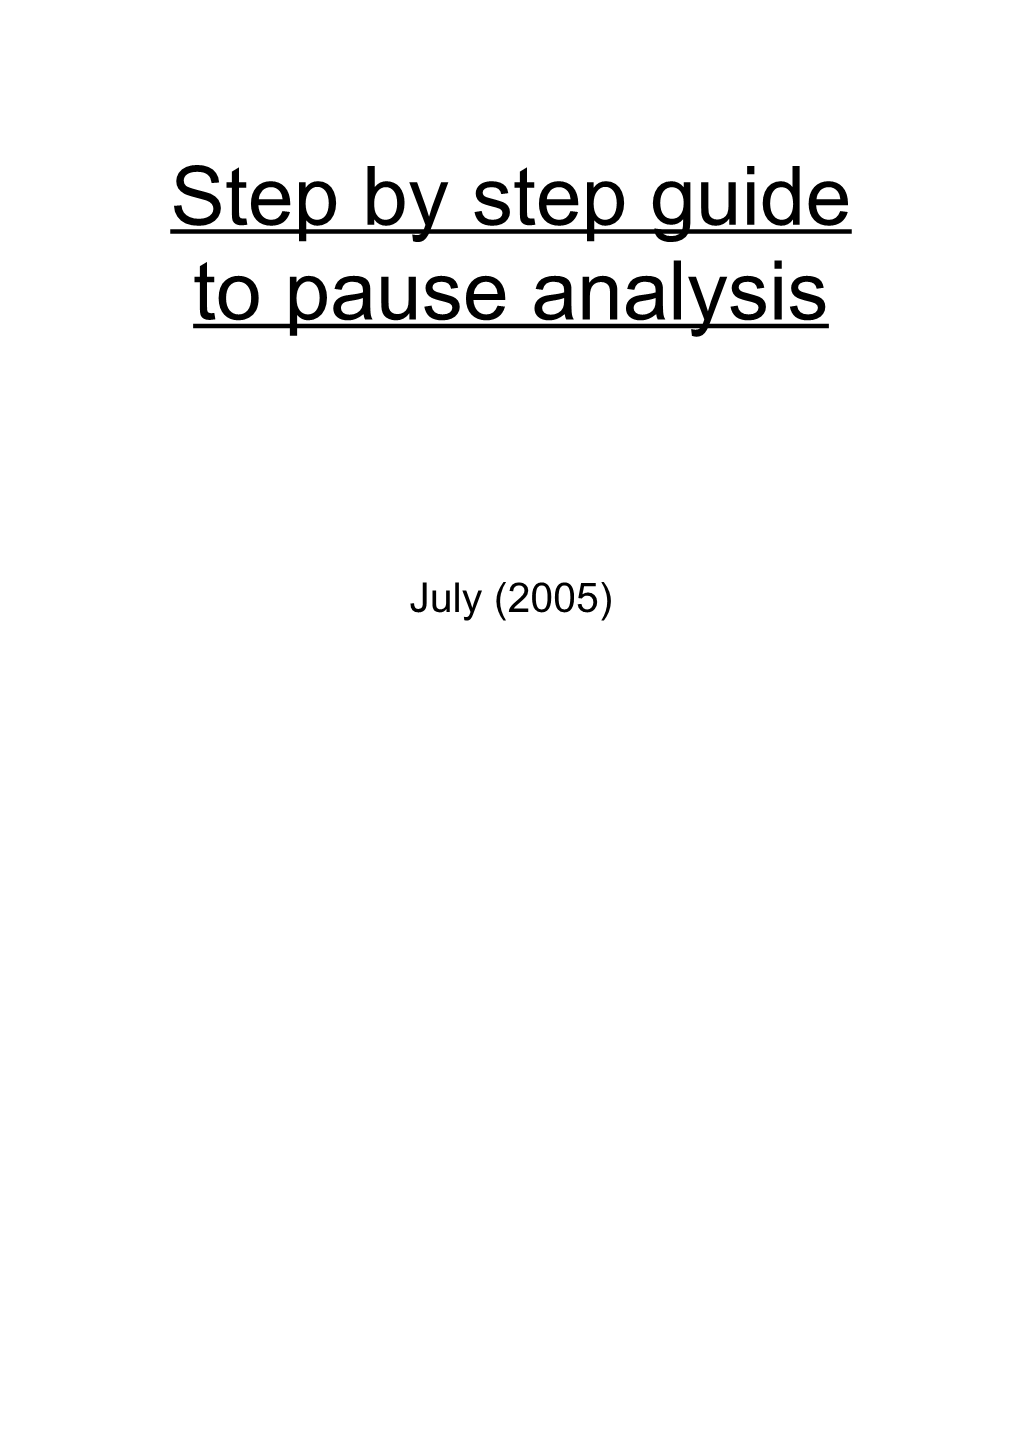 Step by Step Guide to Pause Analysis